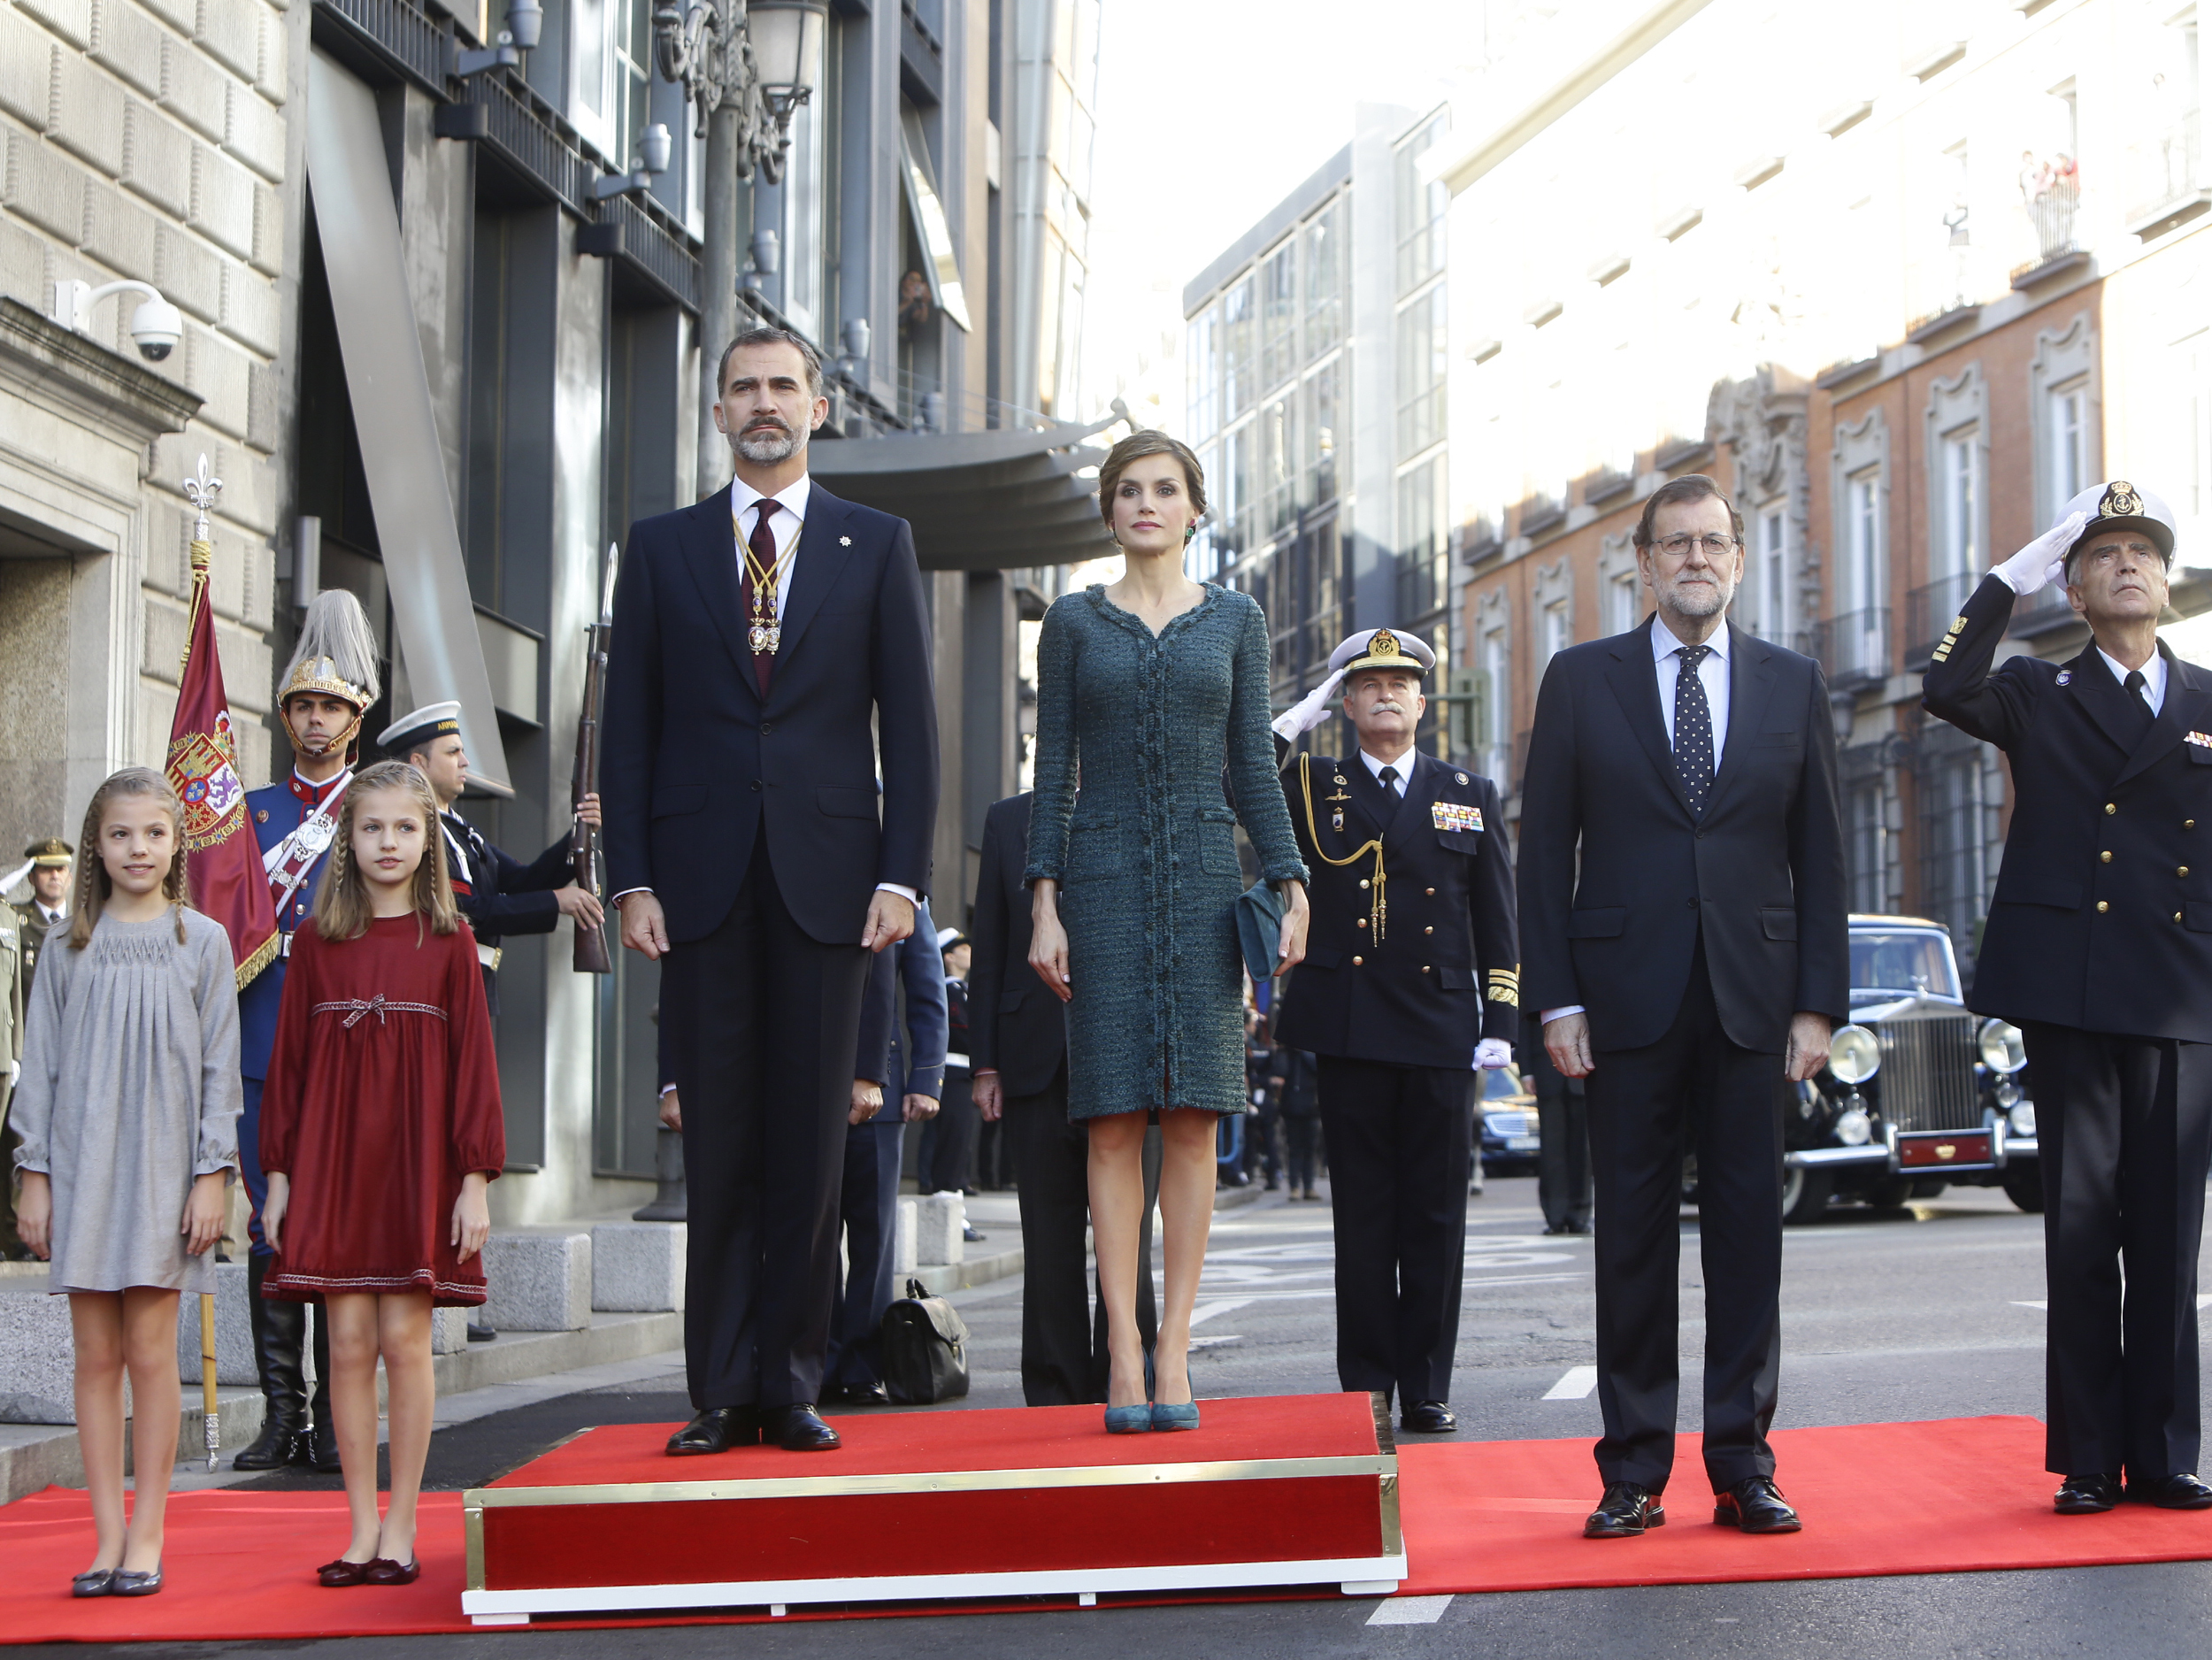 Spain's Royal Family and Spanish President, Mariano Rajoy, during the openning of the XII term of office in Madrid (by ACN)